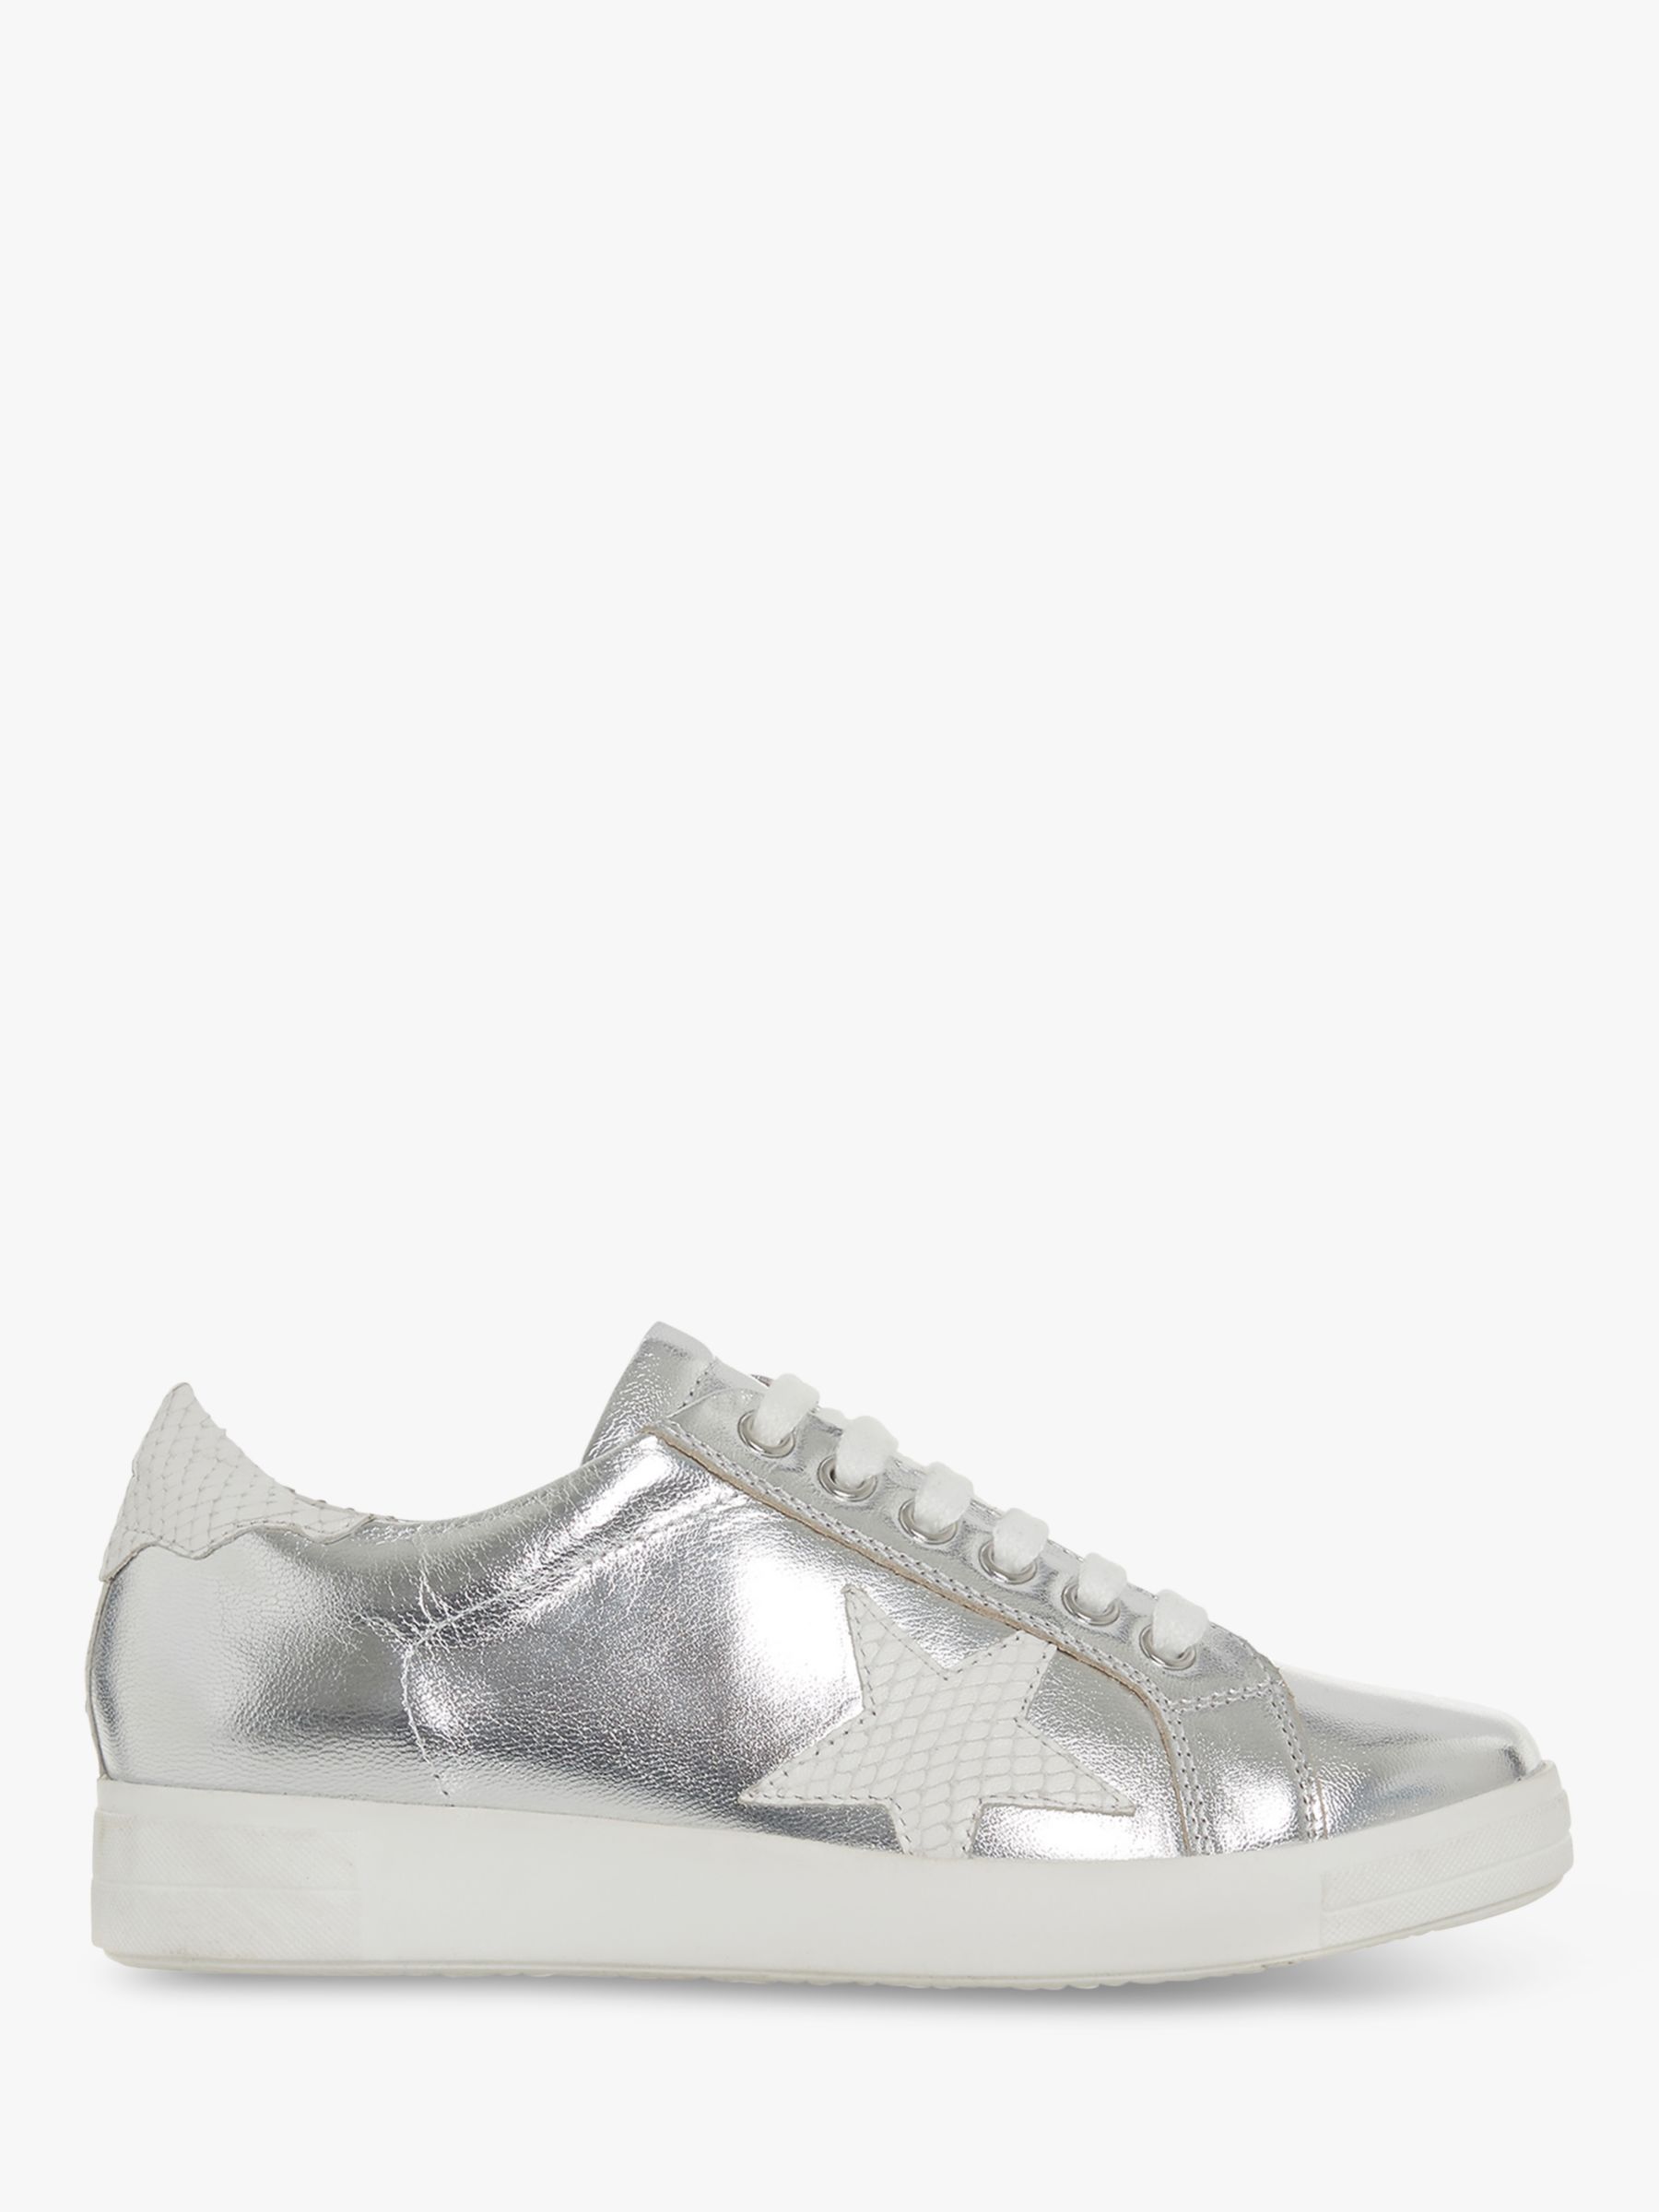 Dune Edris Lace Up Star Trainers, Silver Leather at John Lewis & Partners